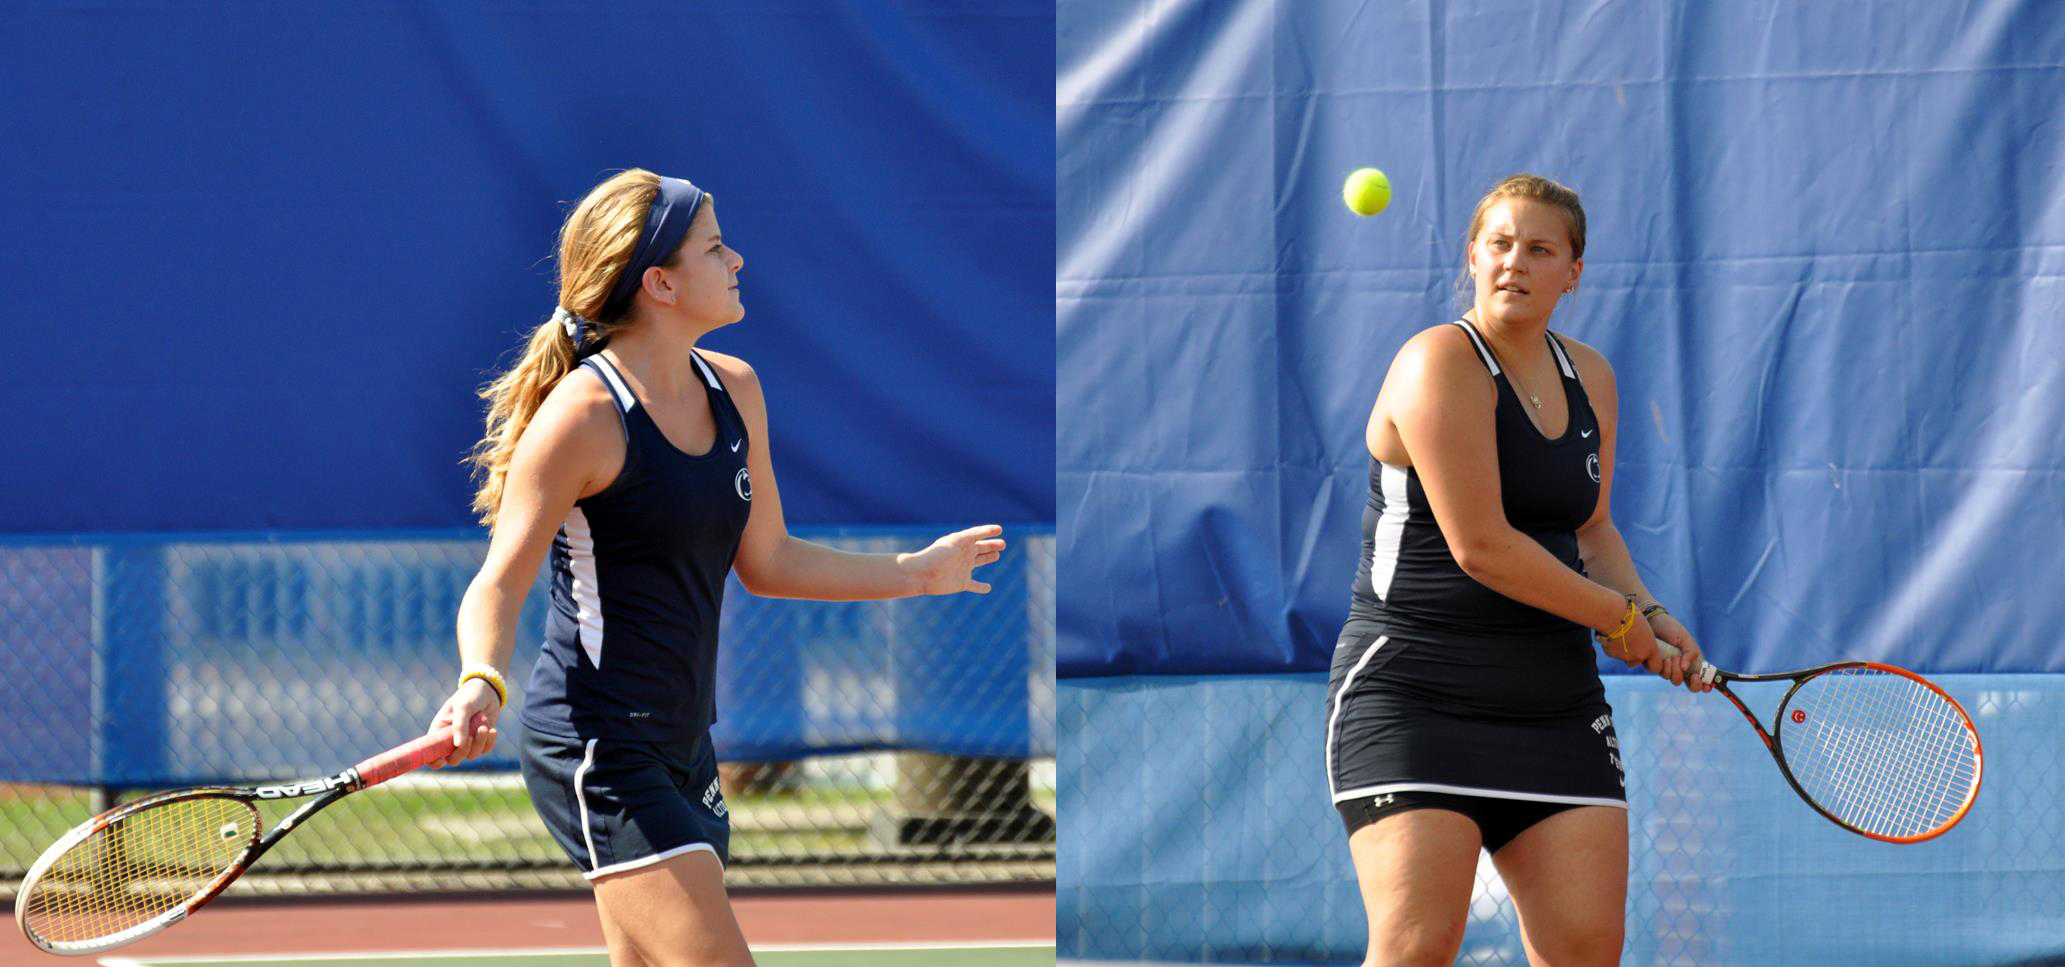 Photo: Penn State Altoona sophomores Annie Ruggles (left) and Brayley Lewis (right) were voted second team All-AMCC for their work together in No. 2 doubles this season.